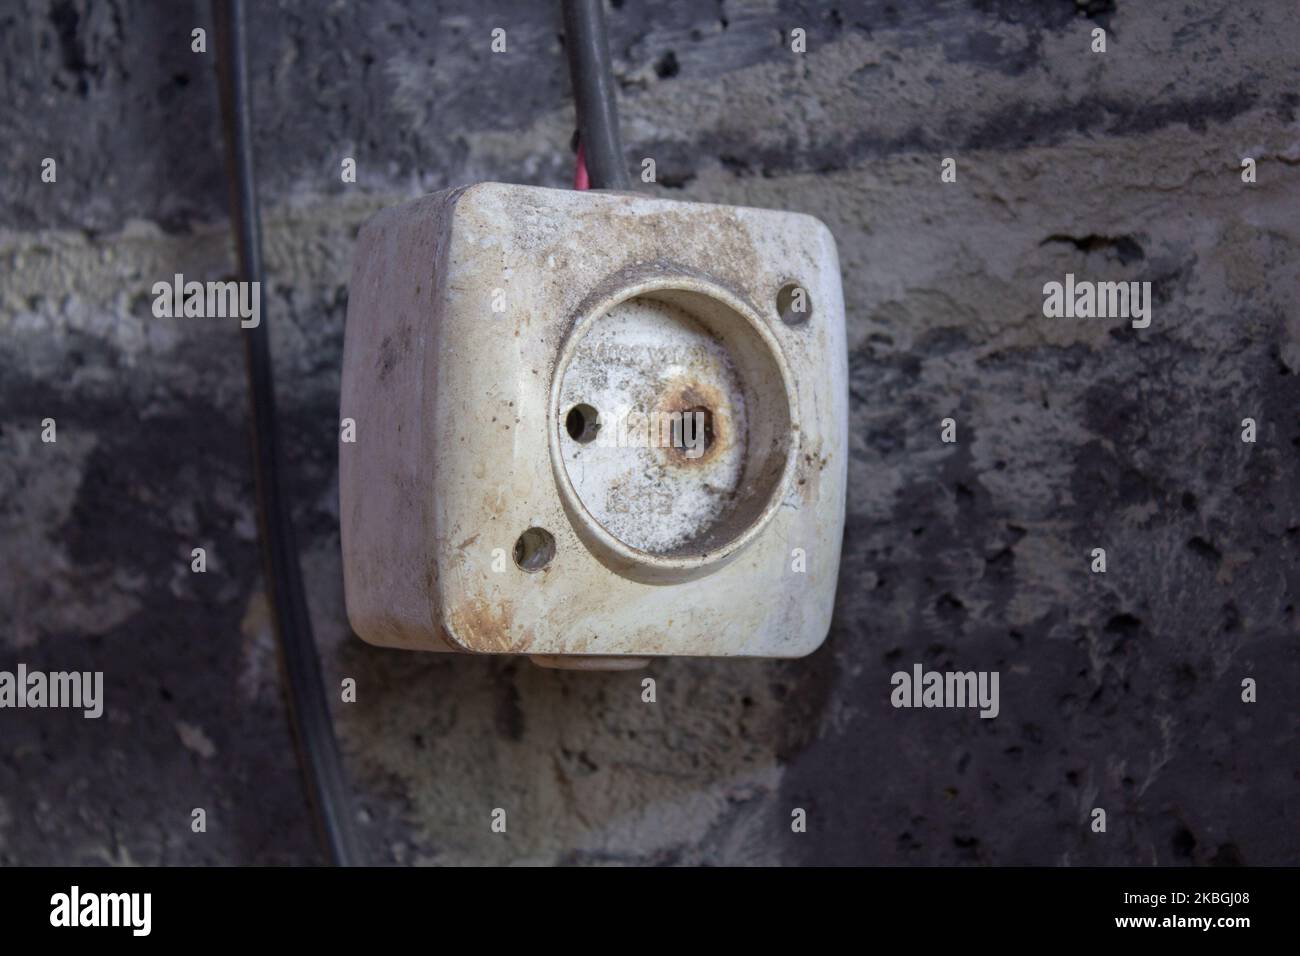 old dangerous electrical outlet on the wall hangs dirty Stock Photo